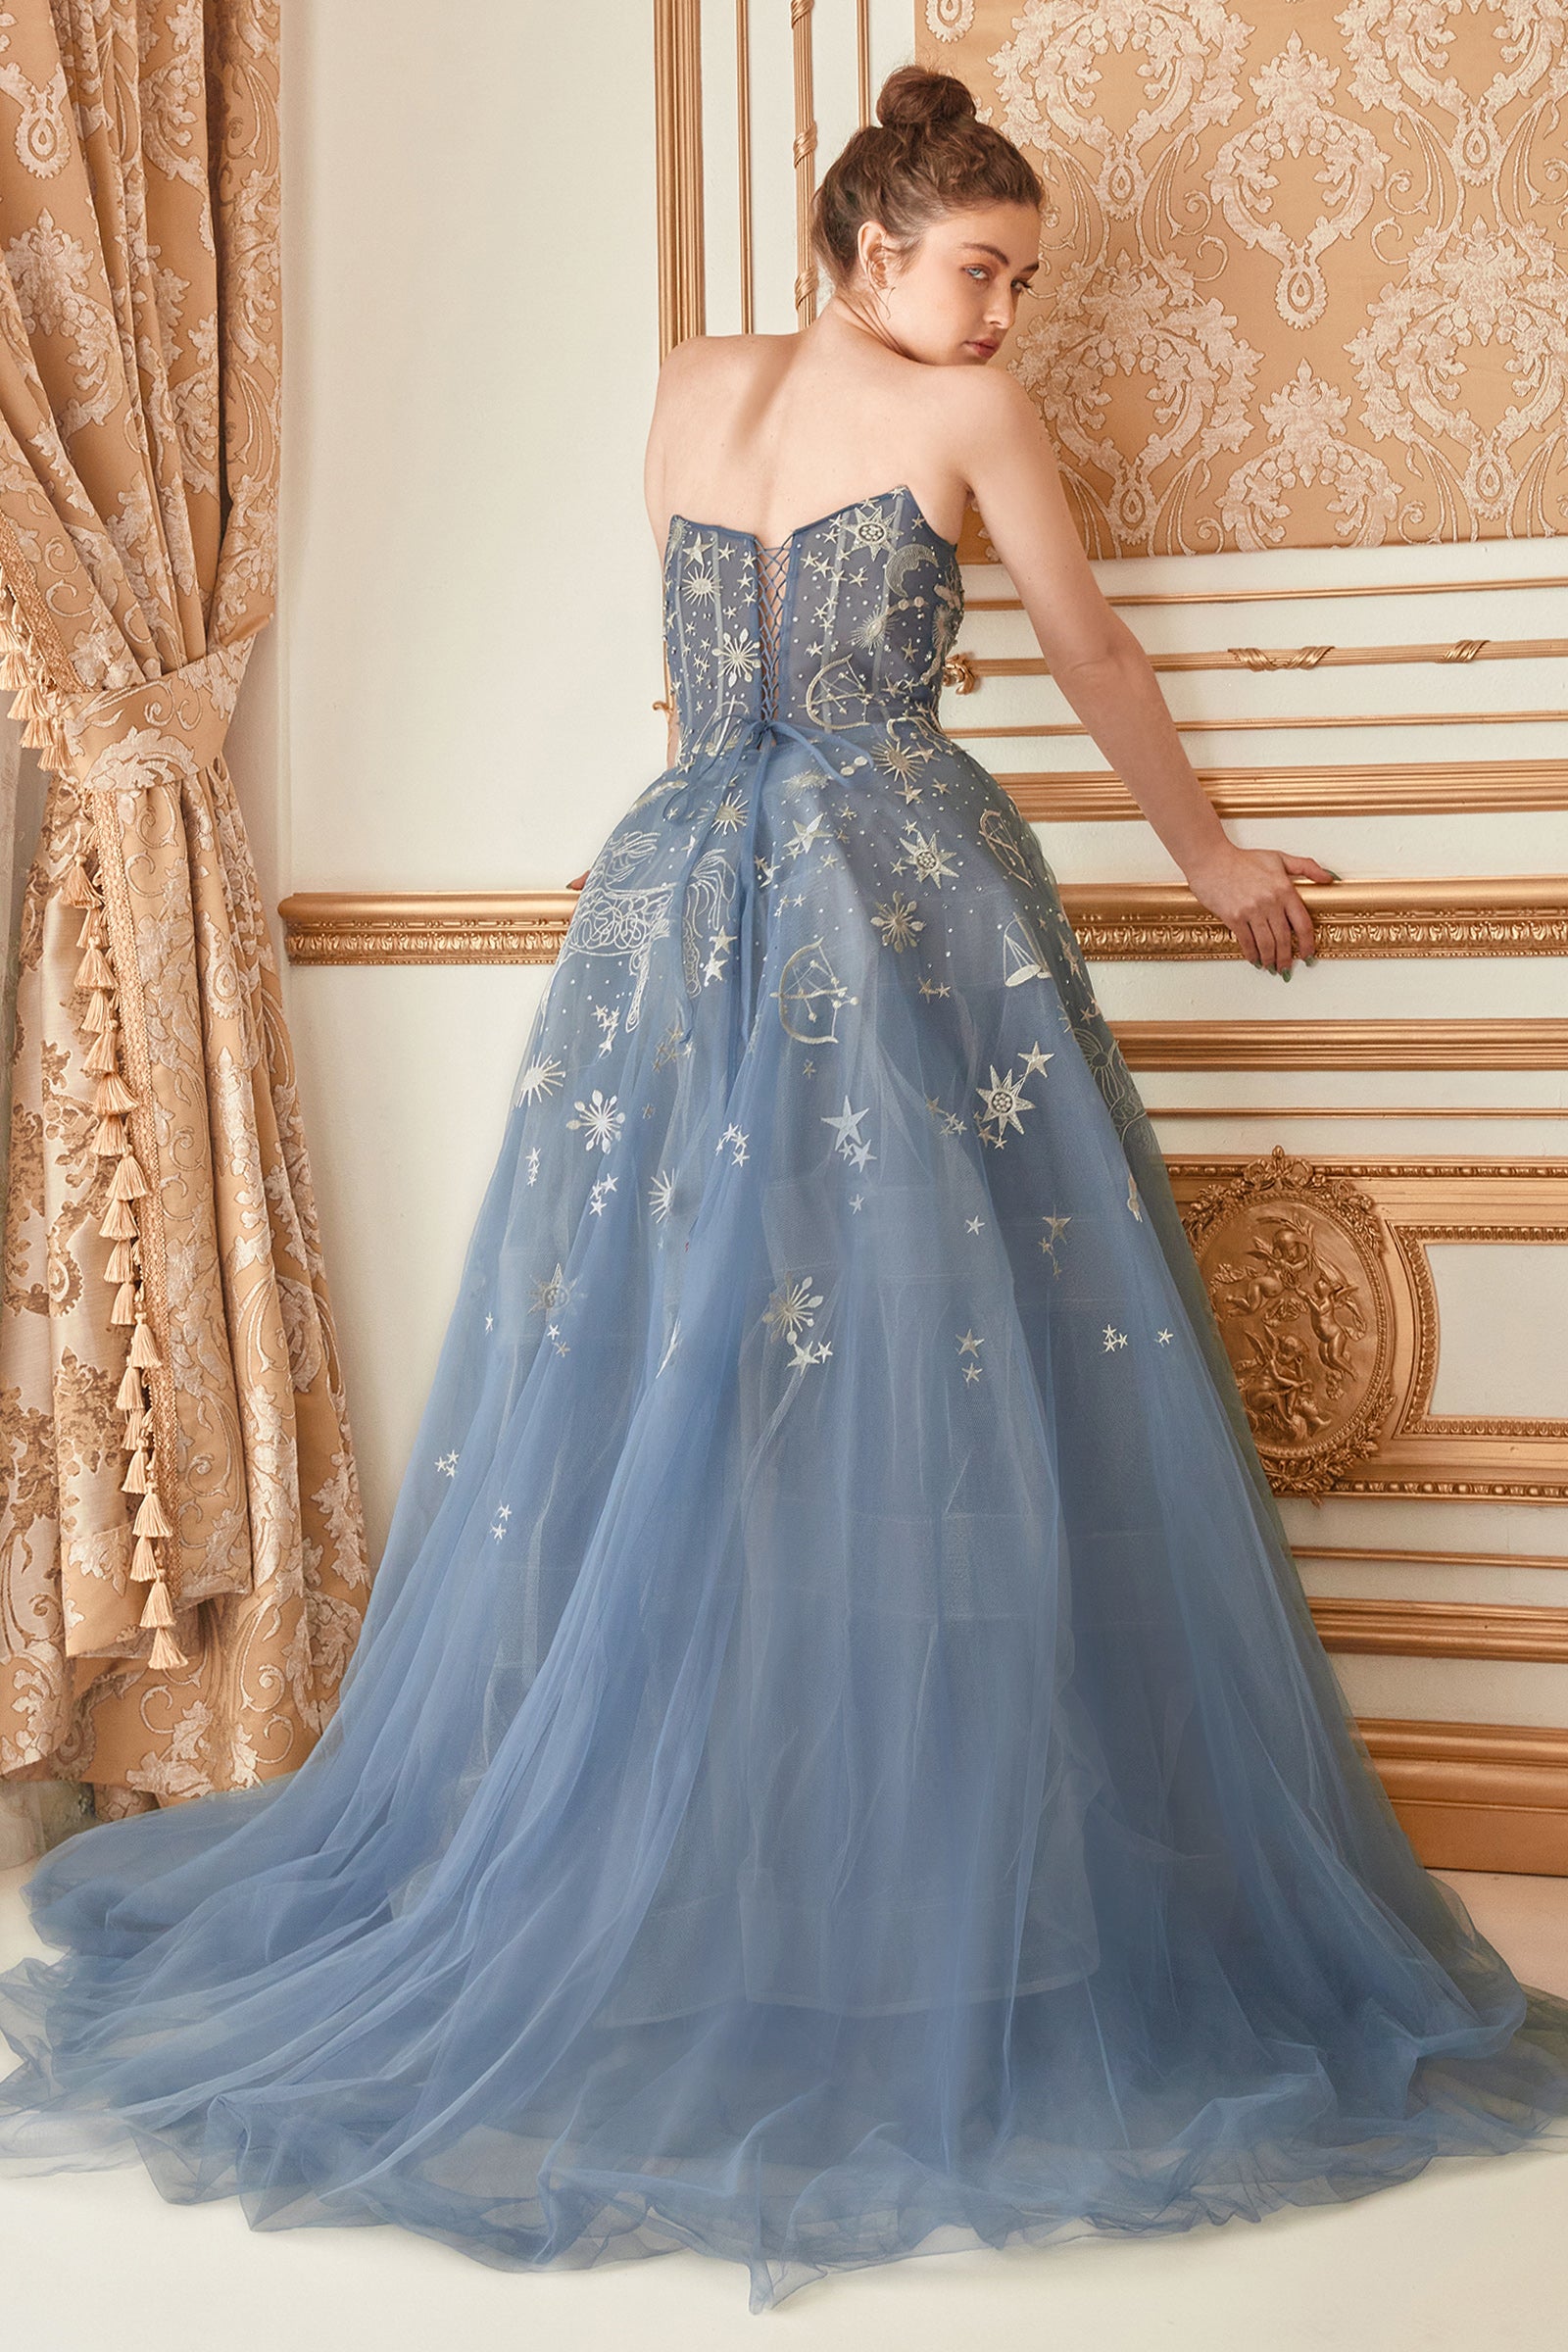 Formal Evening Dresses & Evening Gowns - Terani Couture